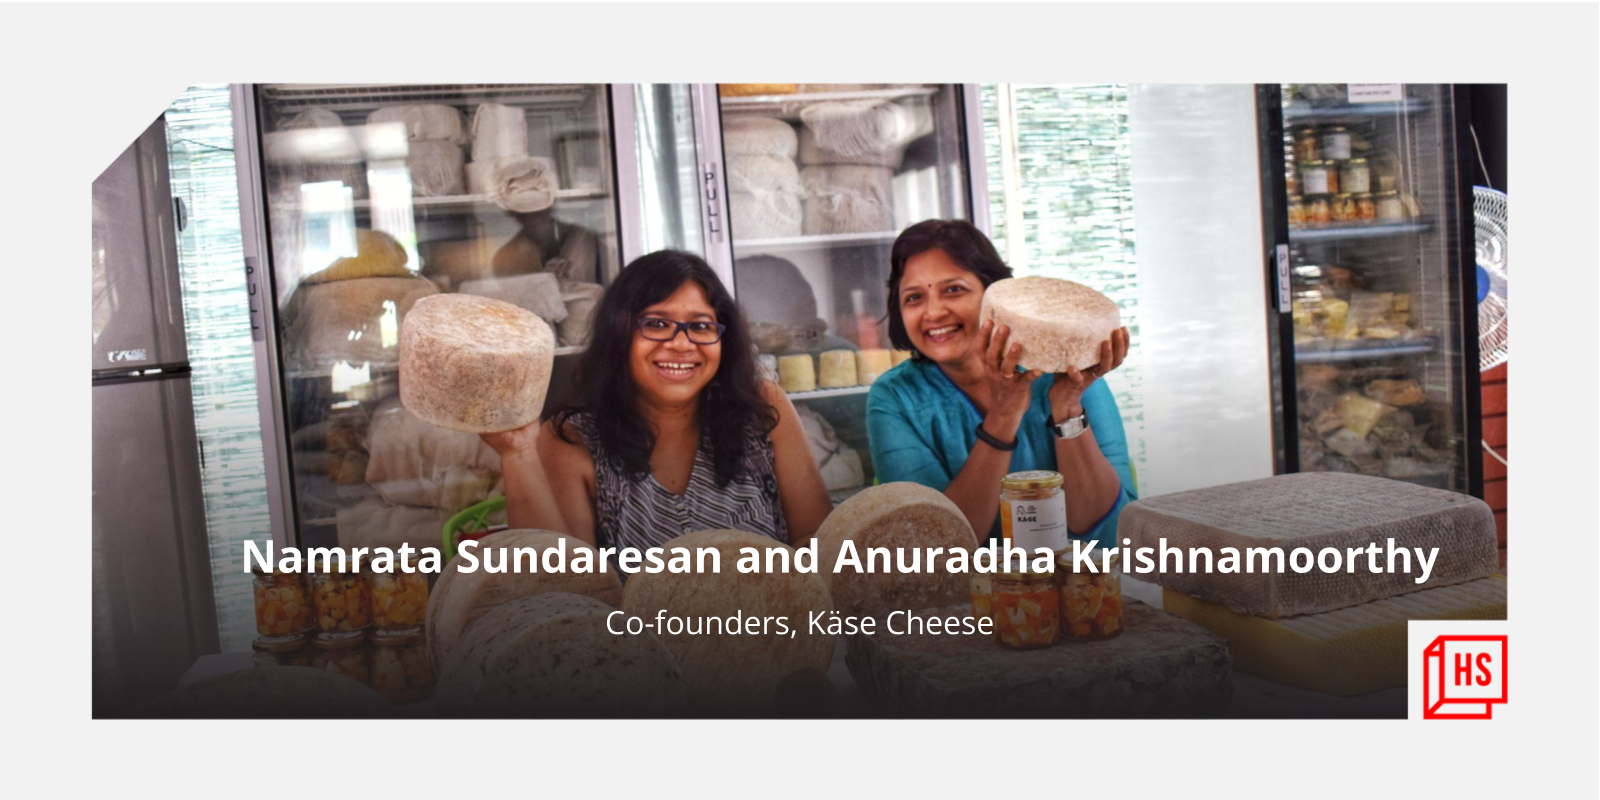 Where there’s a will, there’s whey: Two women entrepreneurs building a responsible artisanal cheese brand 